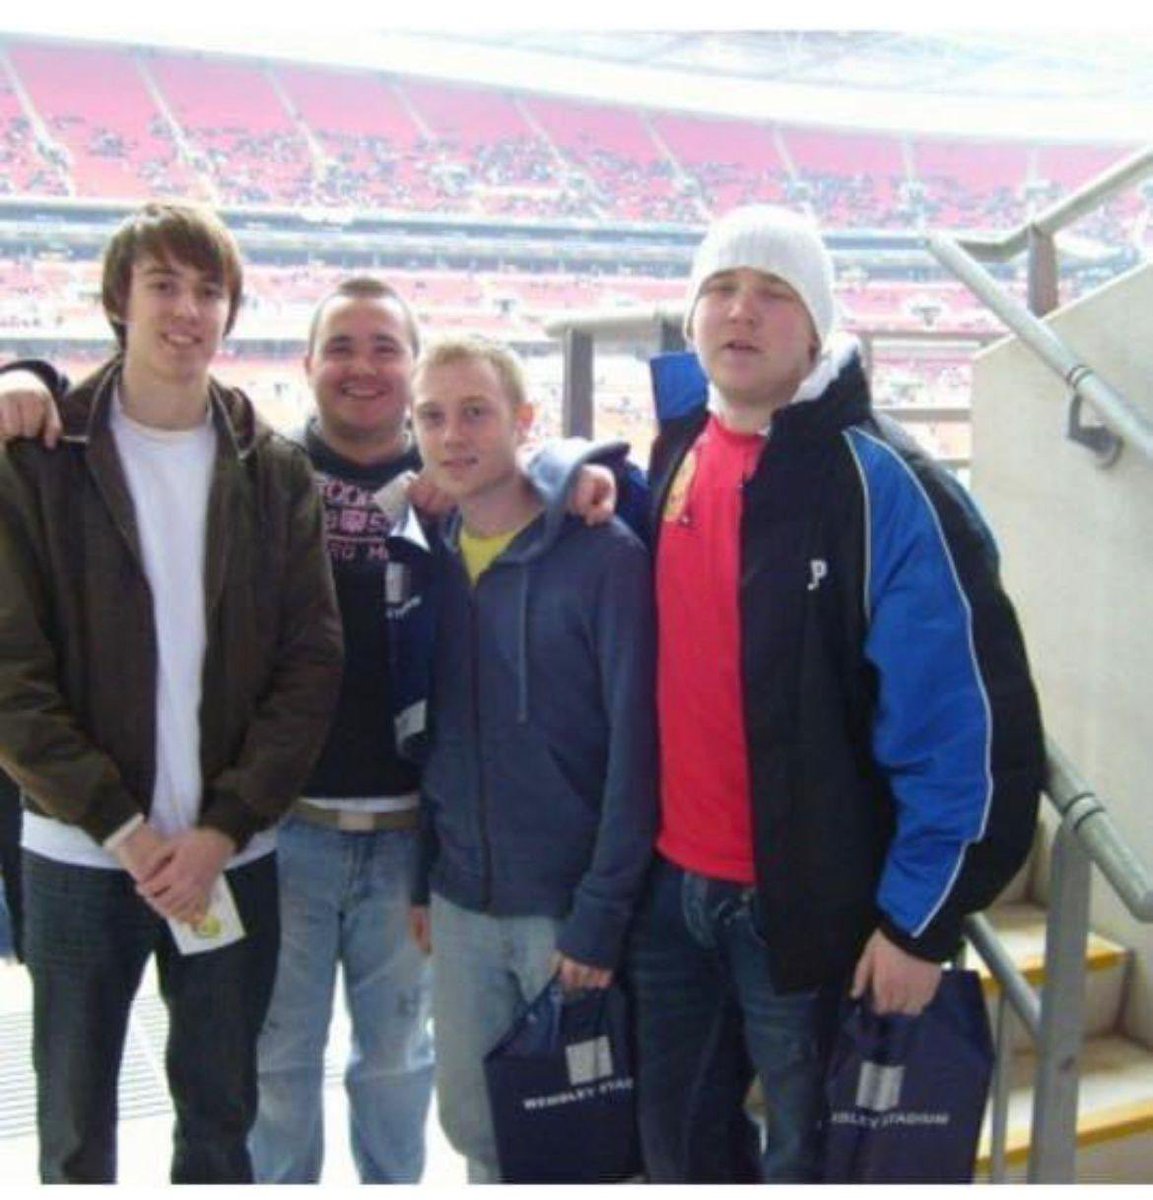 17 years ago today I went to the first game at the ‘New’ Wembley. England U21’s 3-3 Italy U21’s. Pazzini got a hat-trick. He is now retired. James Milner was on the bench. He’s still playing 😳 I had a fringe.